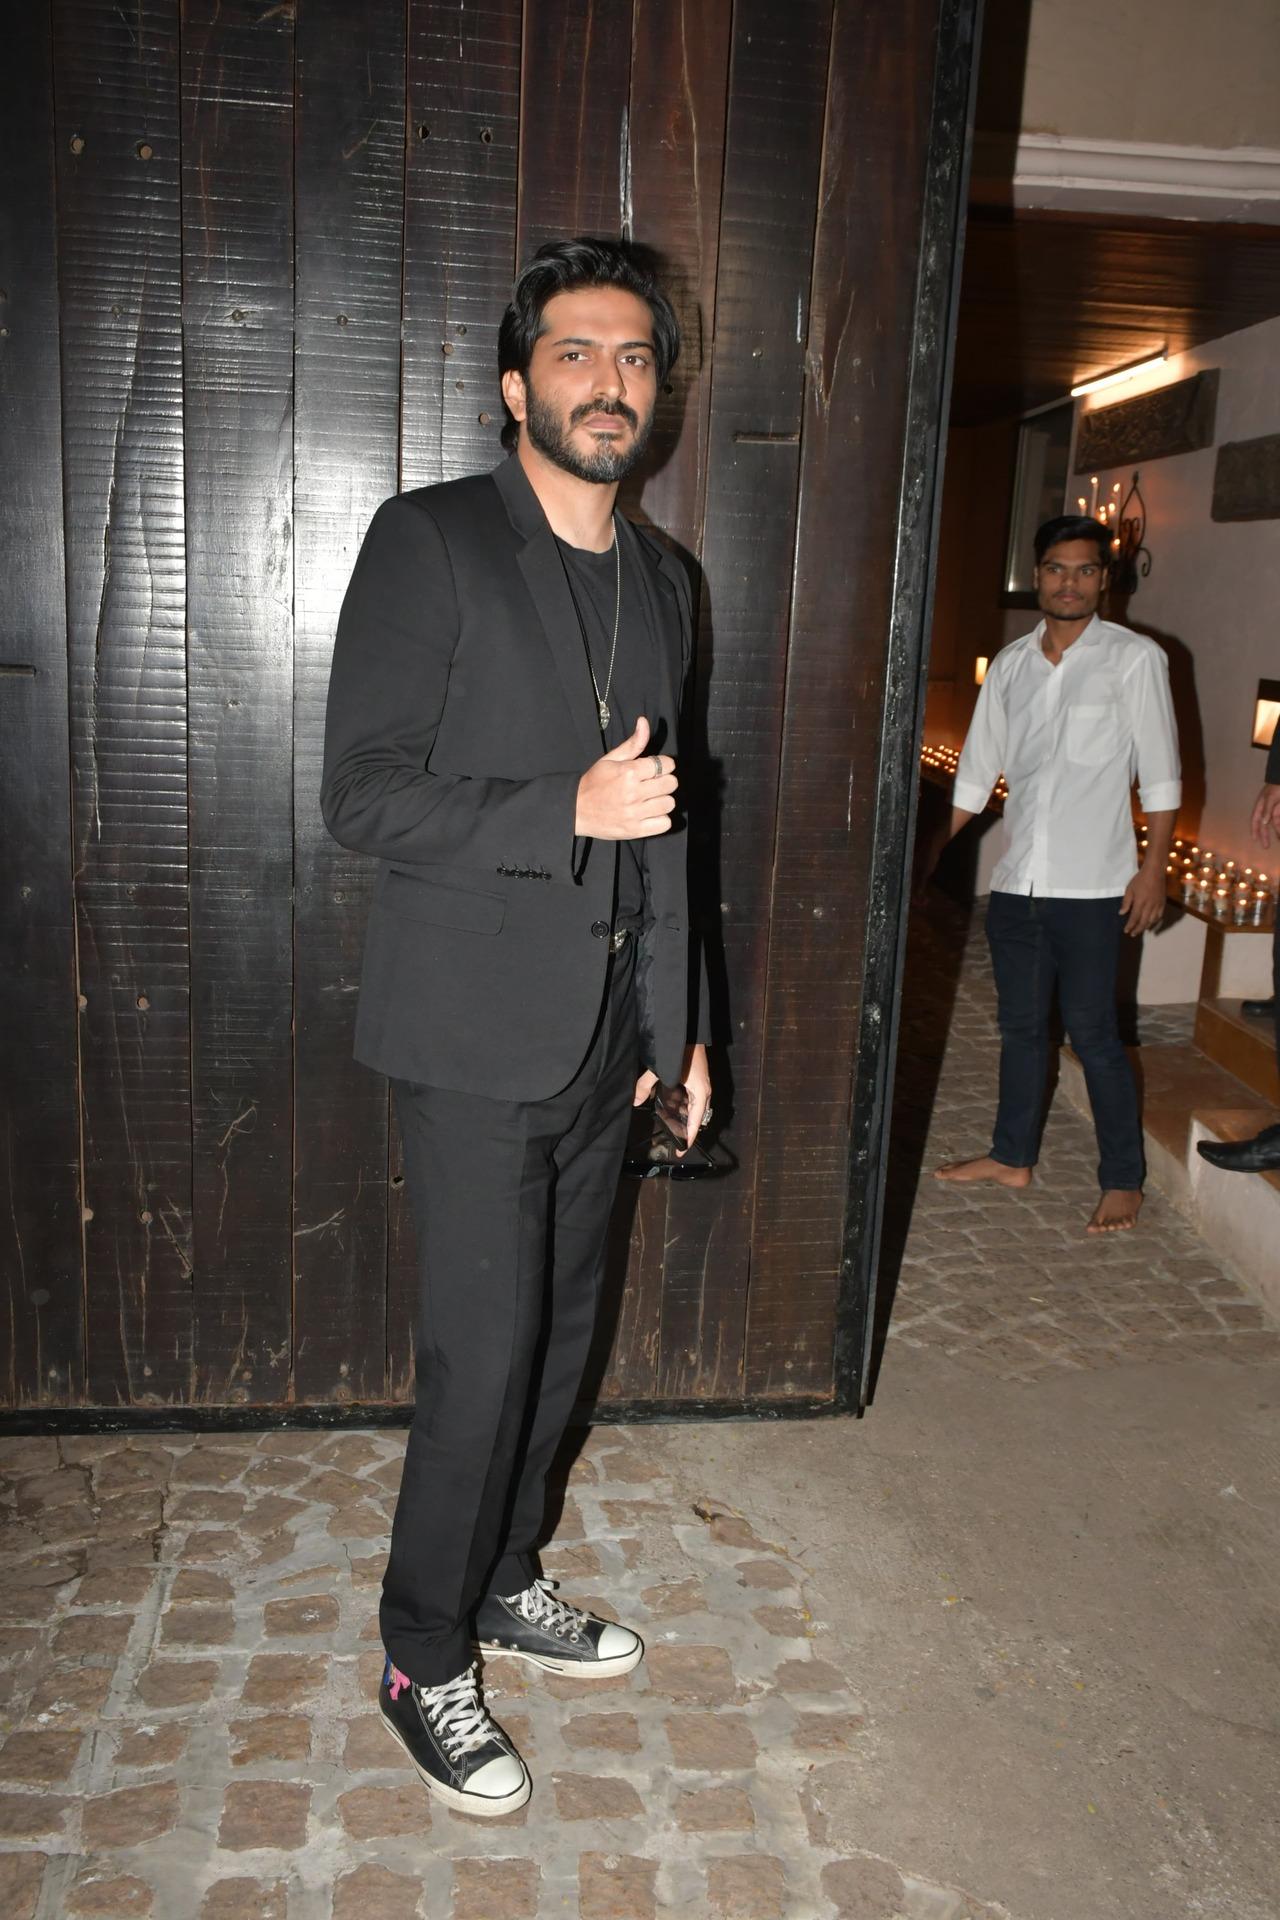 Anil Kapoor's son Harsh Varrdhan Kapoor also attended the party